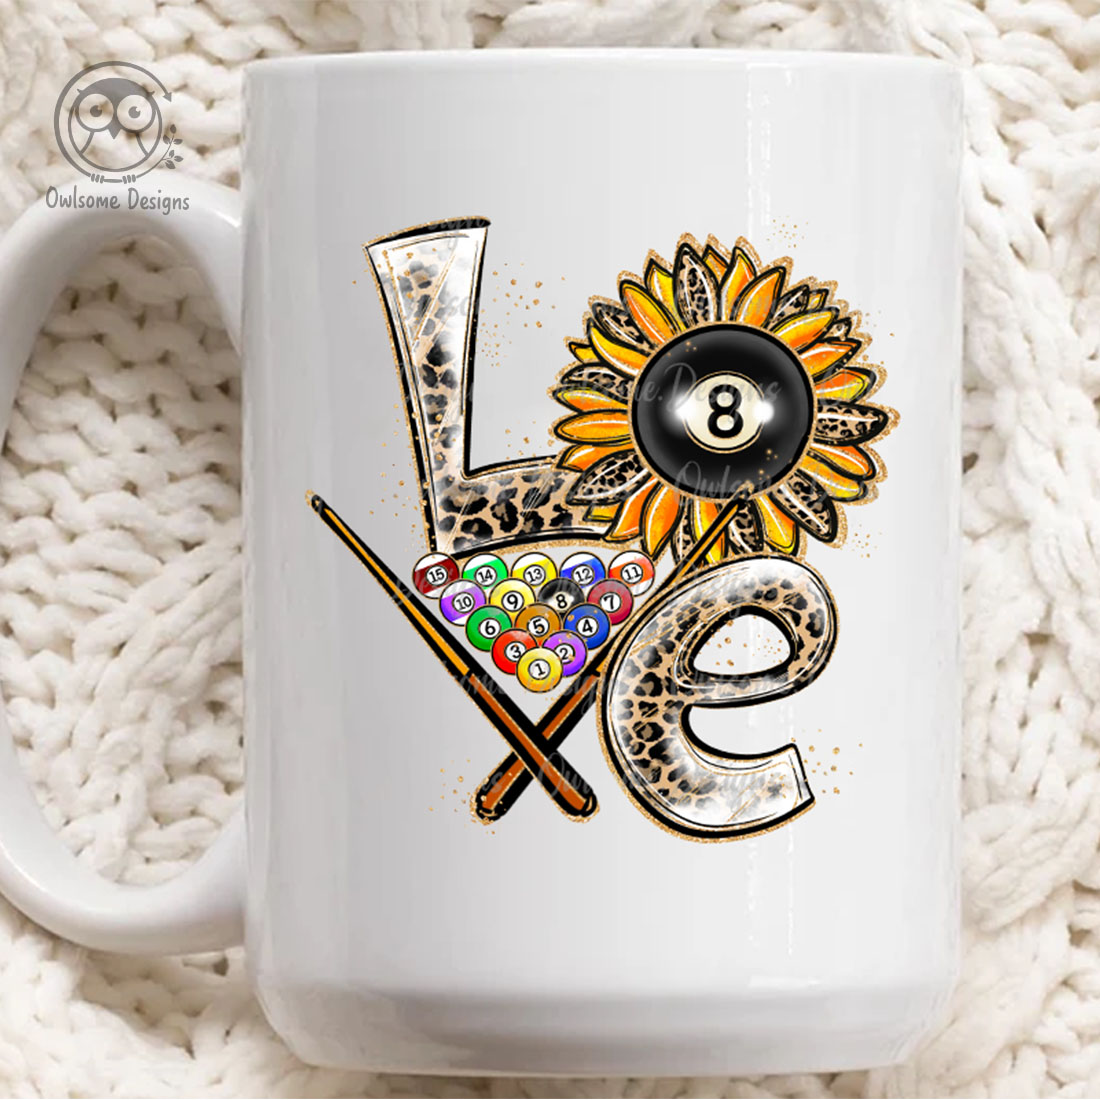 Image of a white cup with a magnificent inscription Love with billiard elements.